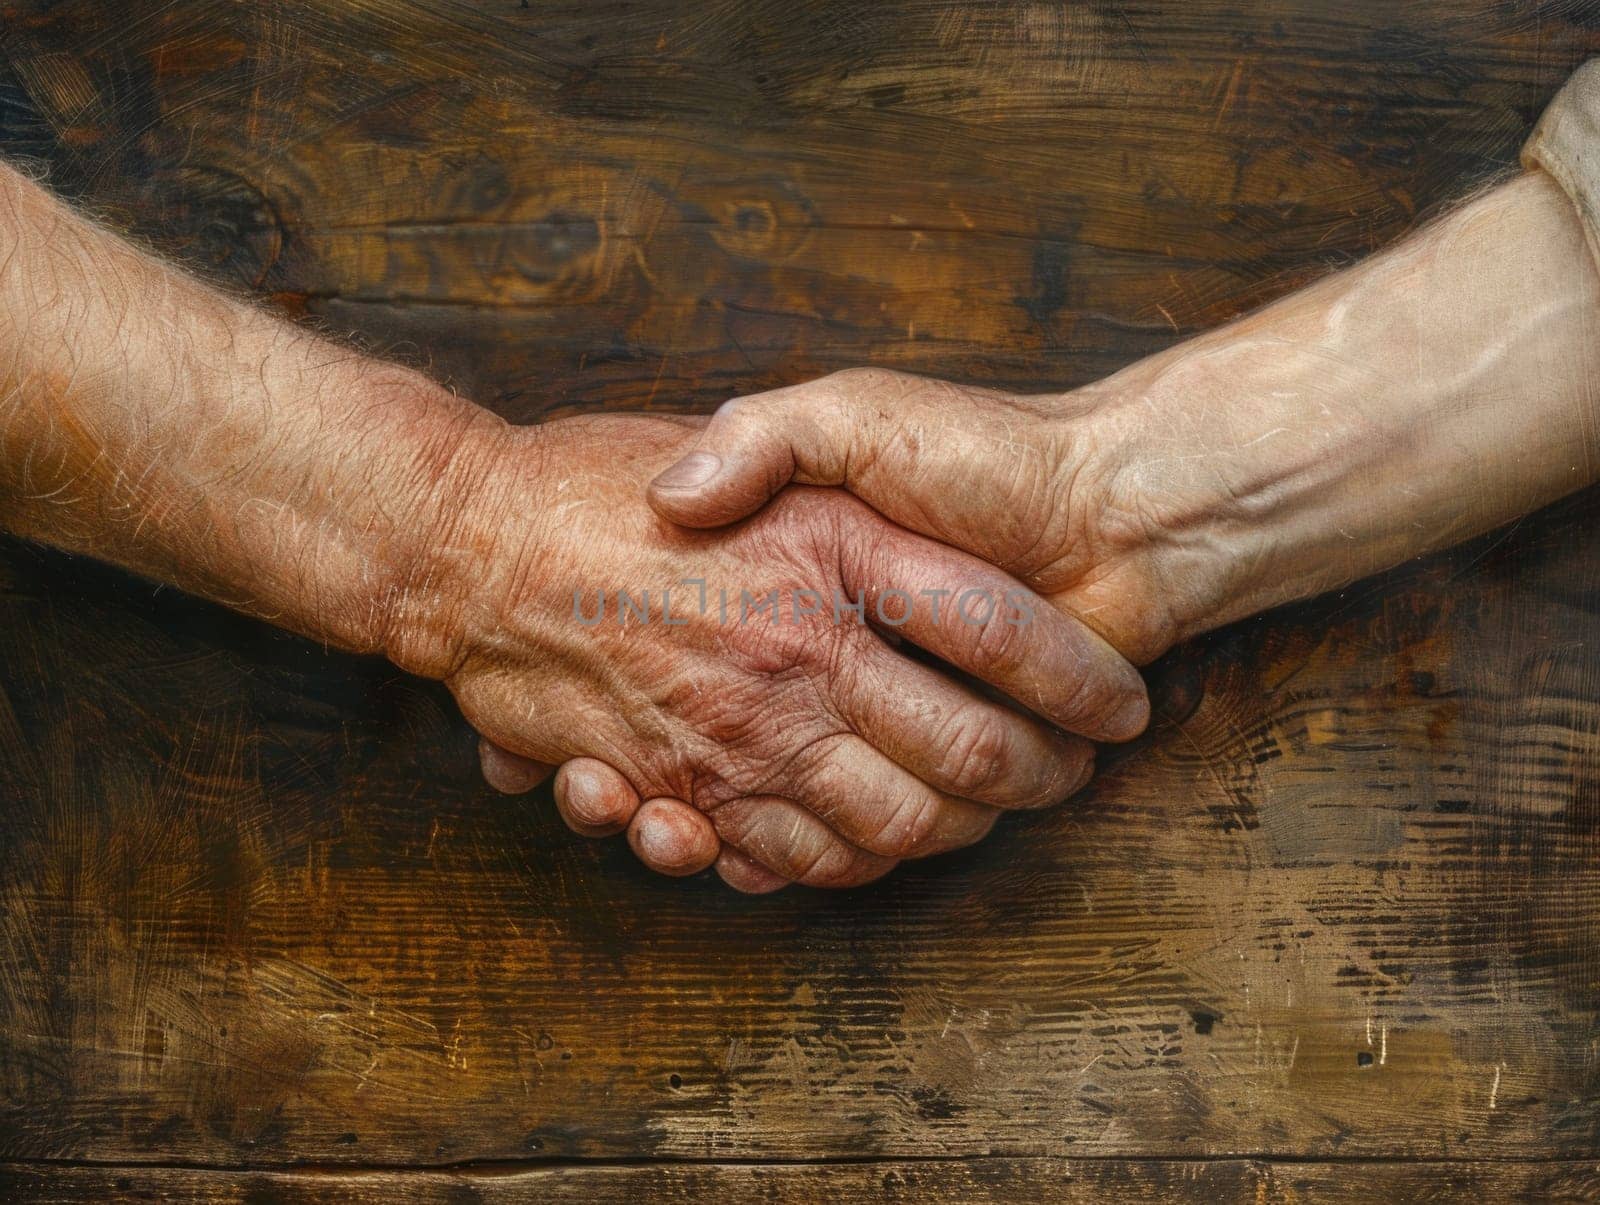 Strong Handshake Between Two People on Wooden Background by but_photo